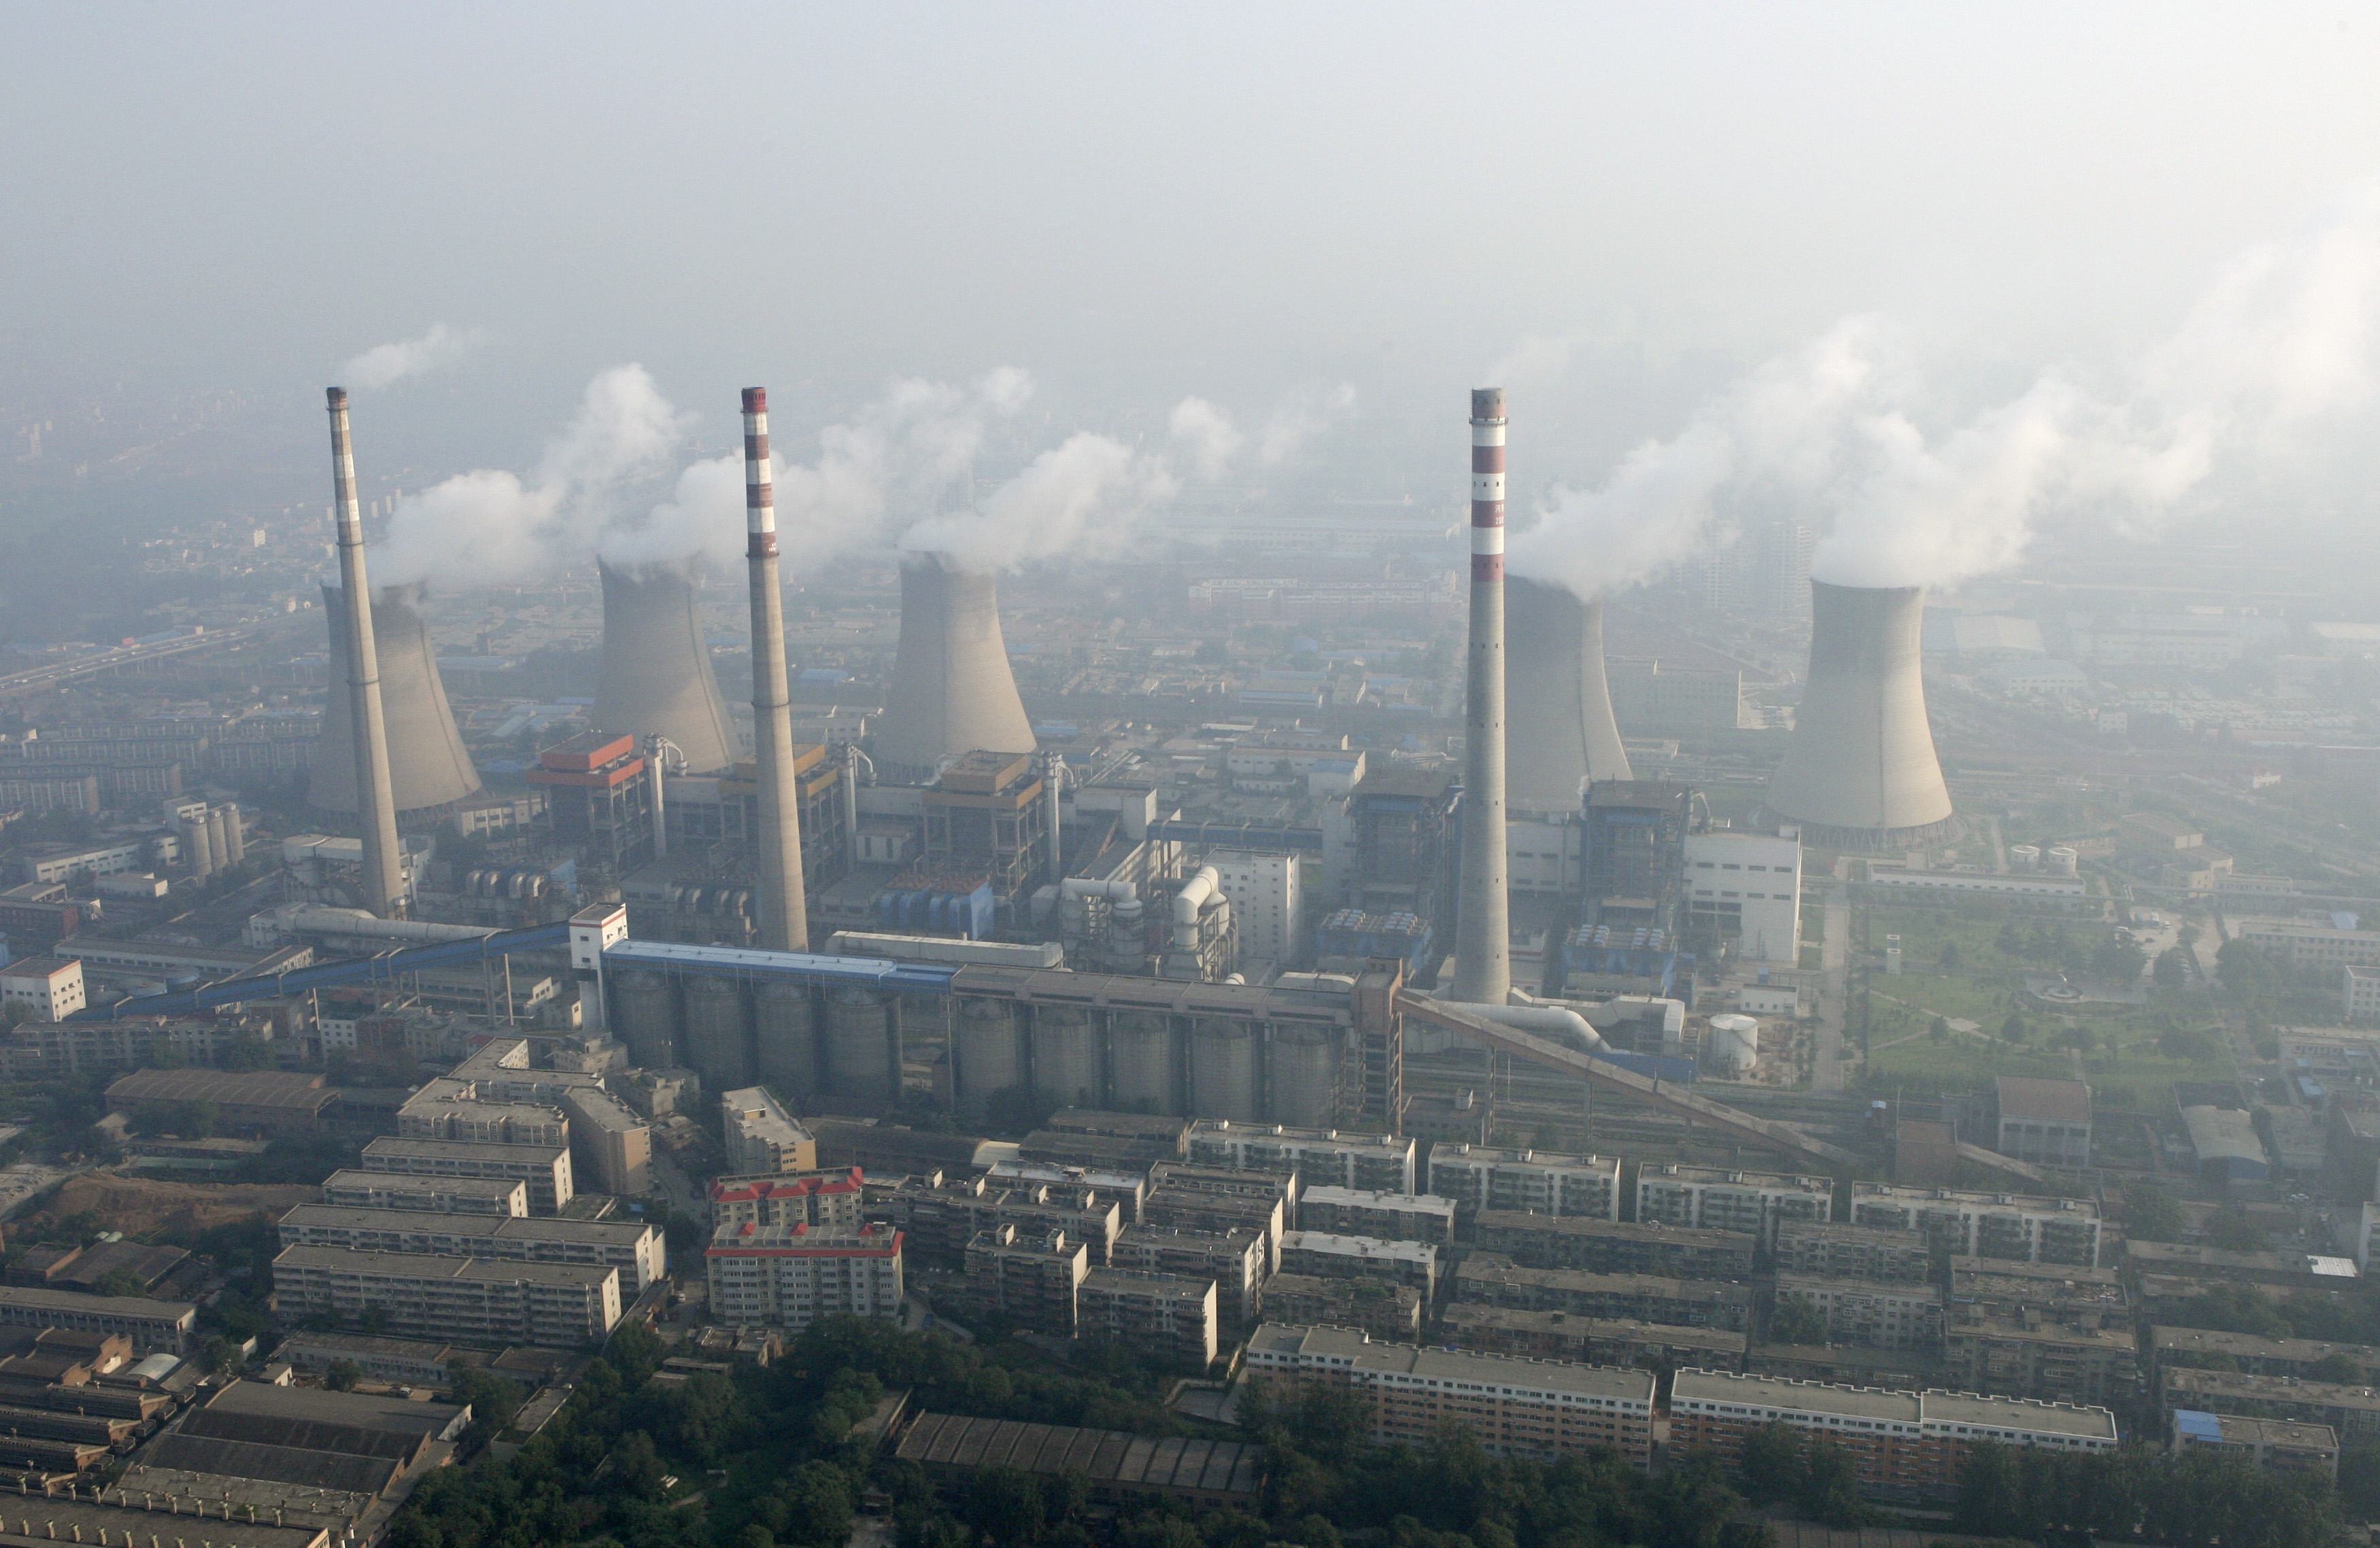 Coal-burning power stations in Zhengzhou, Henan province, which lies in the Central China area that was blanketed with dangerous levels of pollution for much of last year. Photo: Reuters